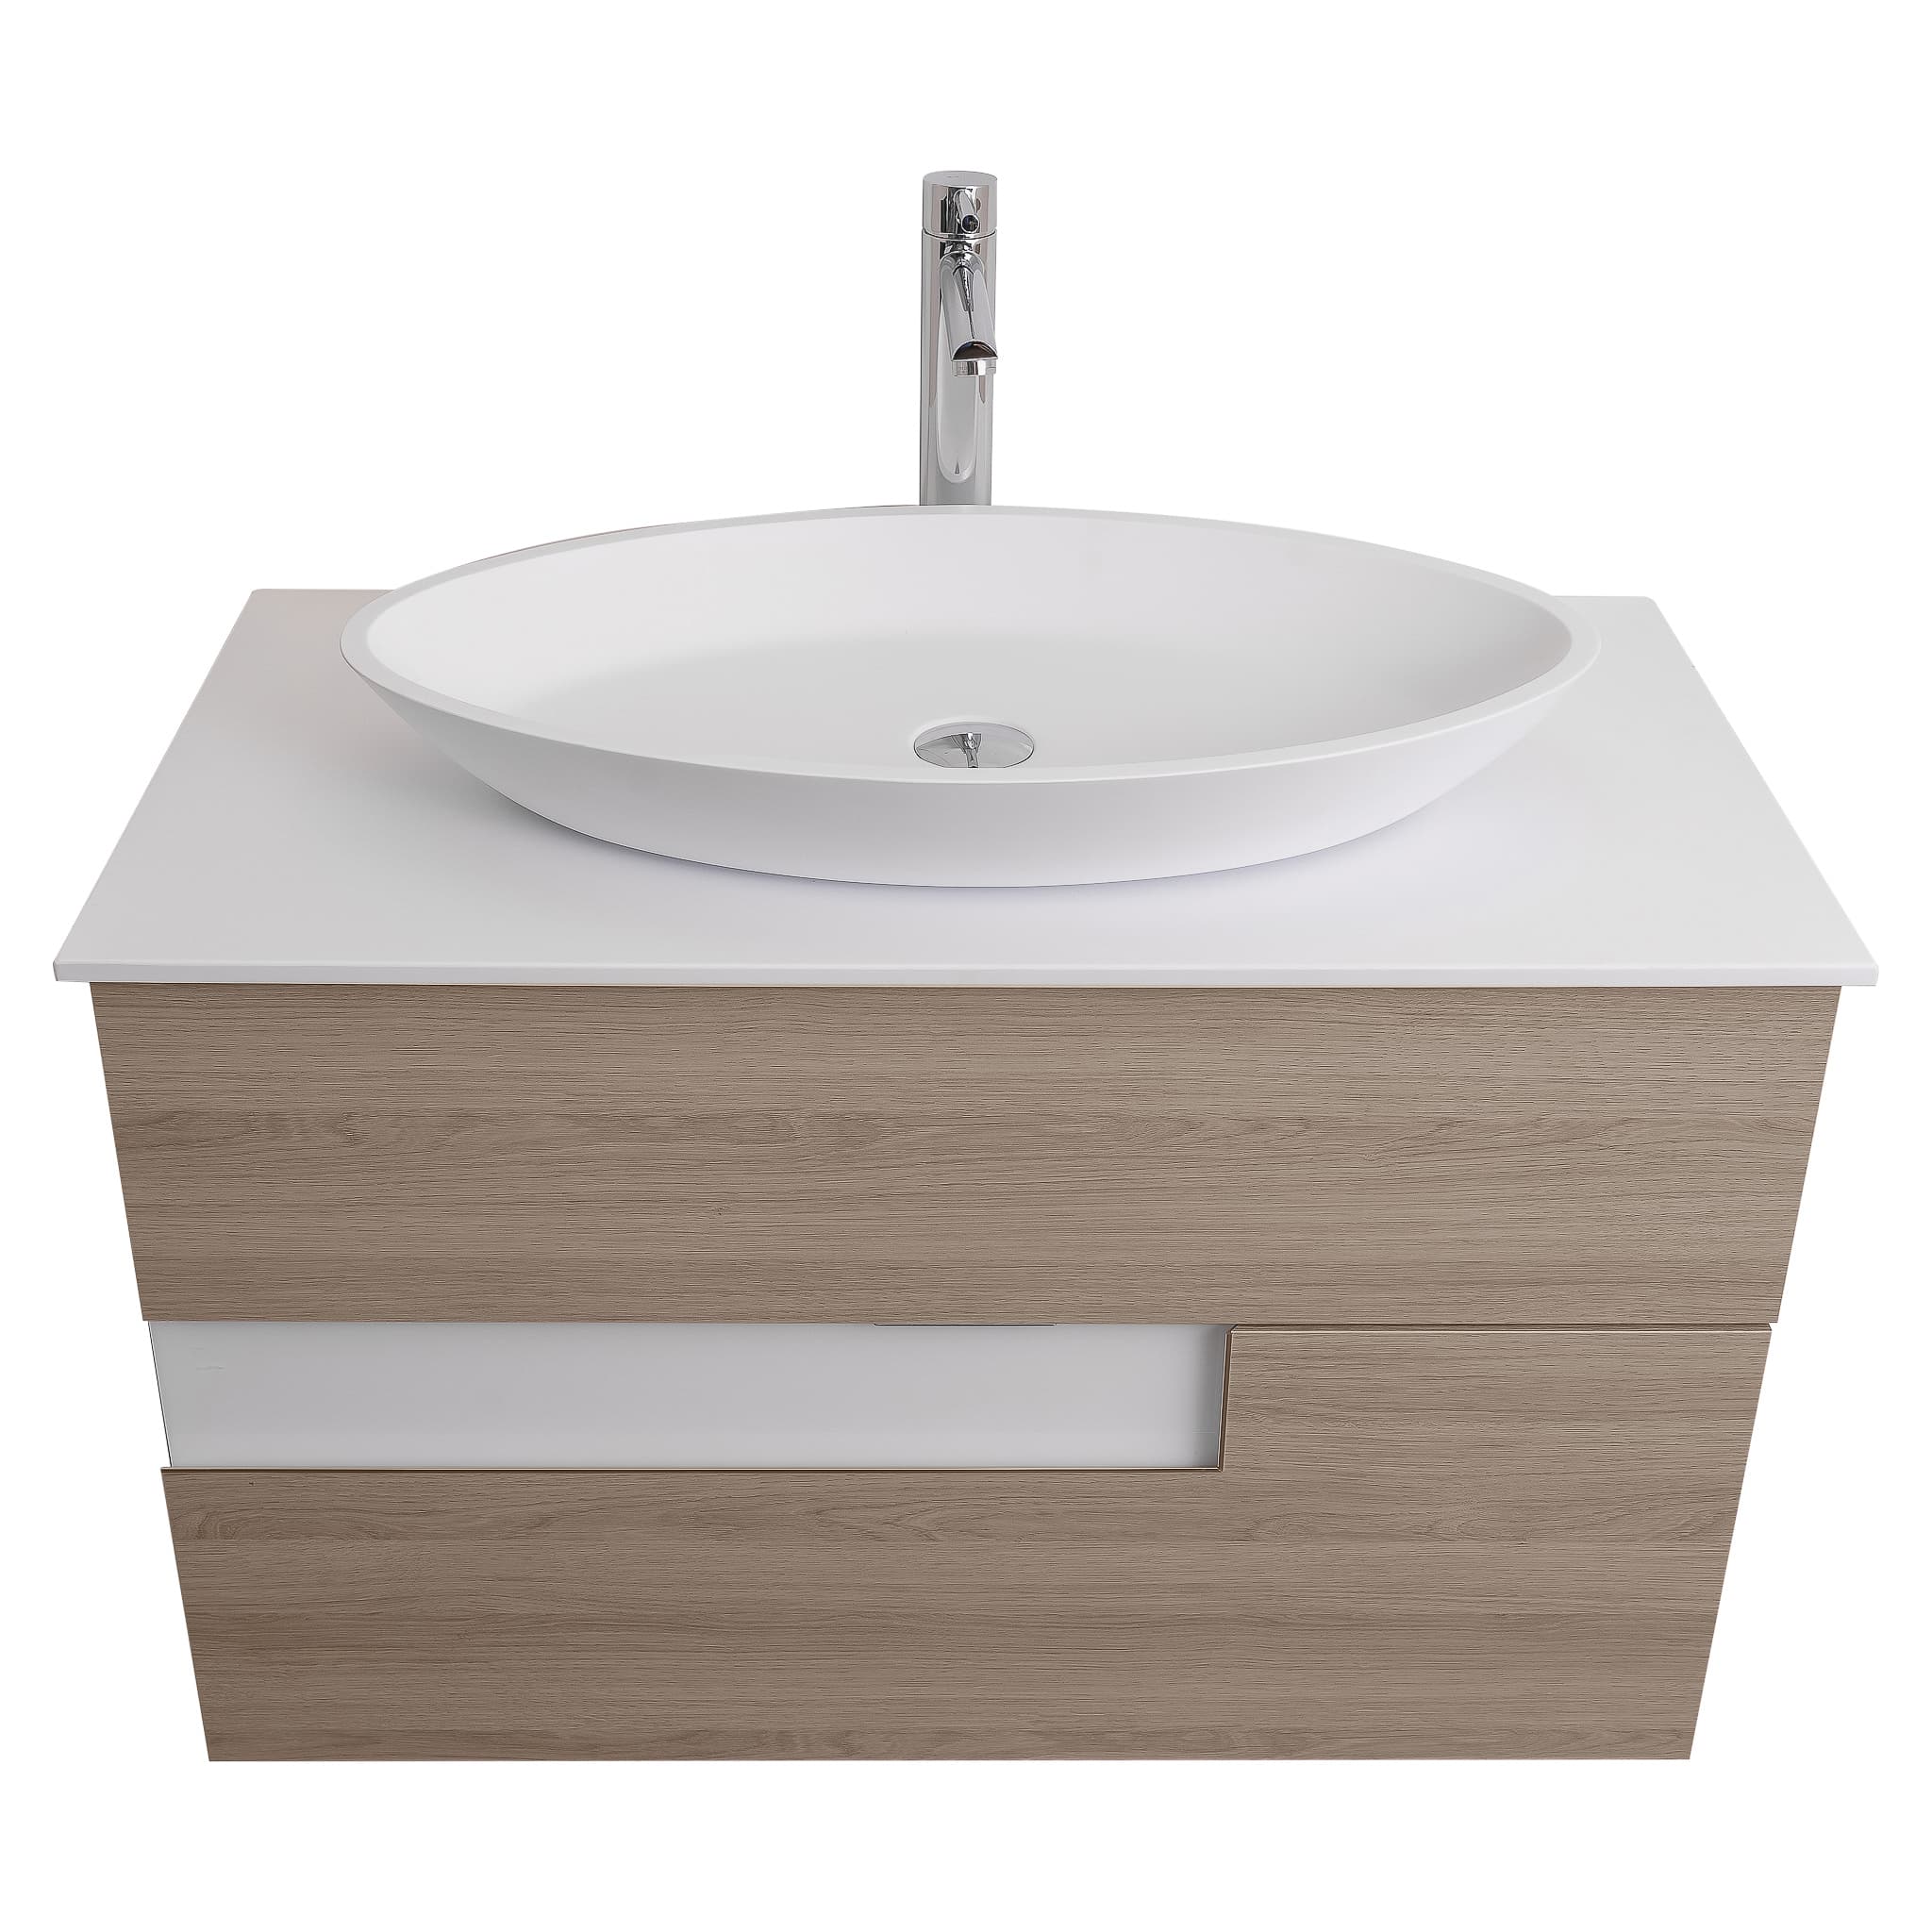 Vision 31.5 Natural Light Wood Cabinet, Solid Surface Flat White Counter And Oval Solid Surface White Basin 1305, Wall Mounted Modern Vanity Set